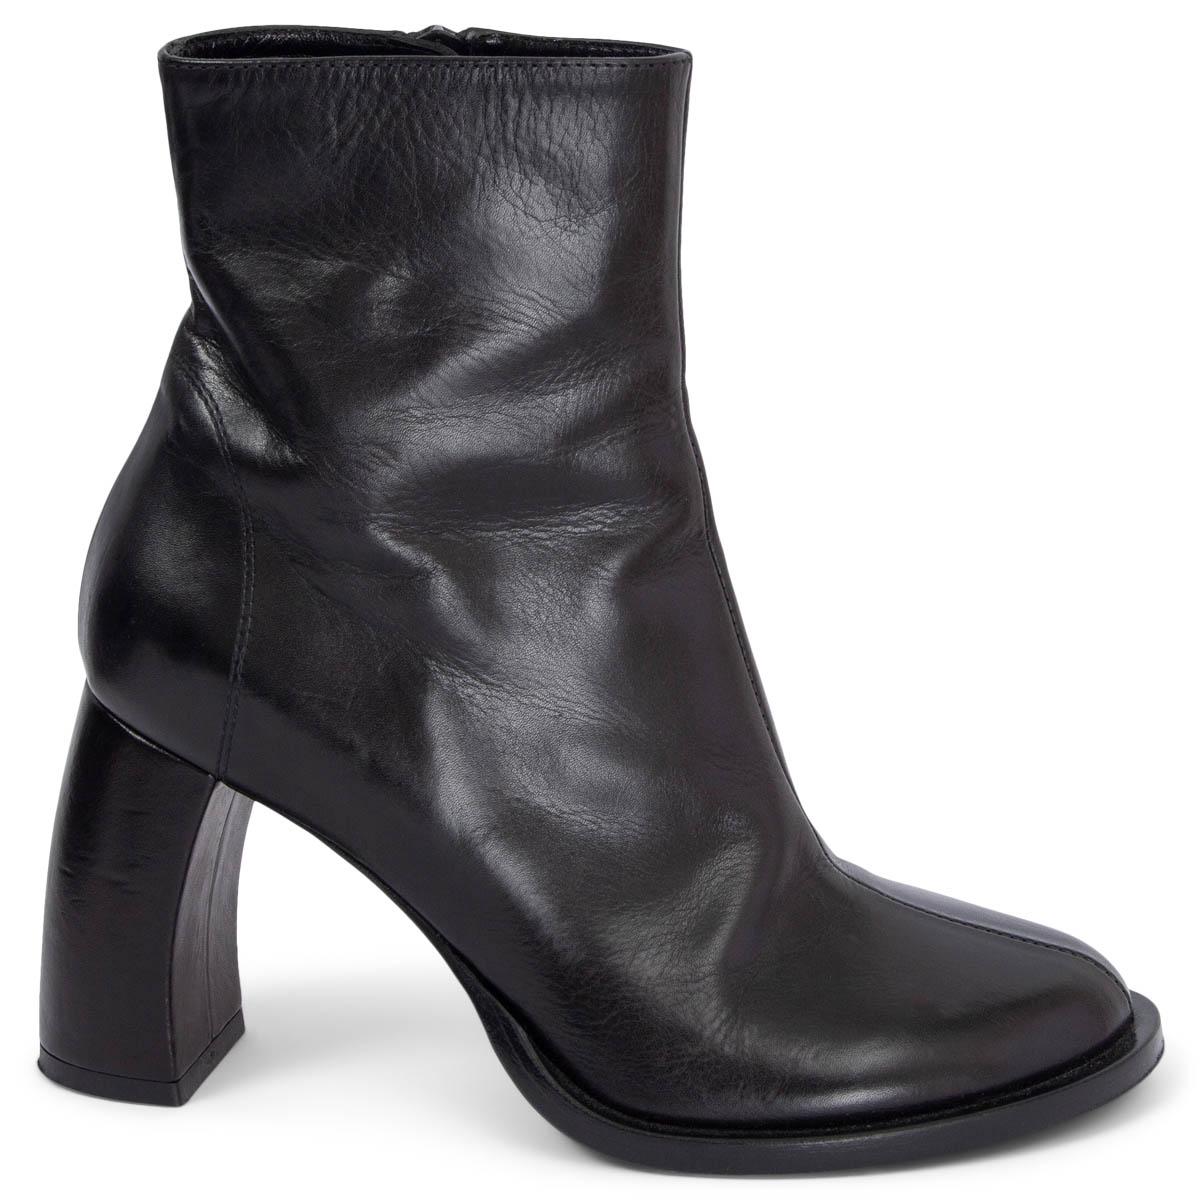 ANN DEMEULEMEESTER black leather LISA Ankle Boots Shoes 37 For Sale